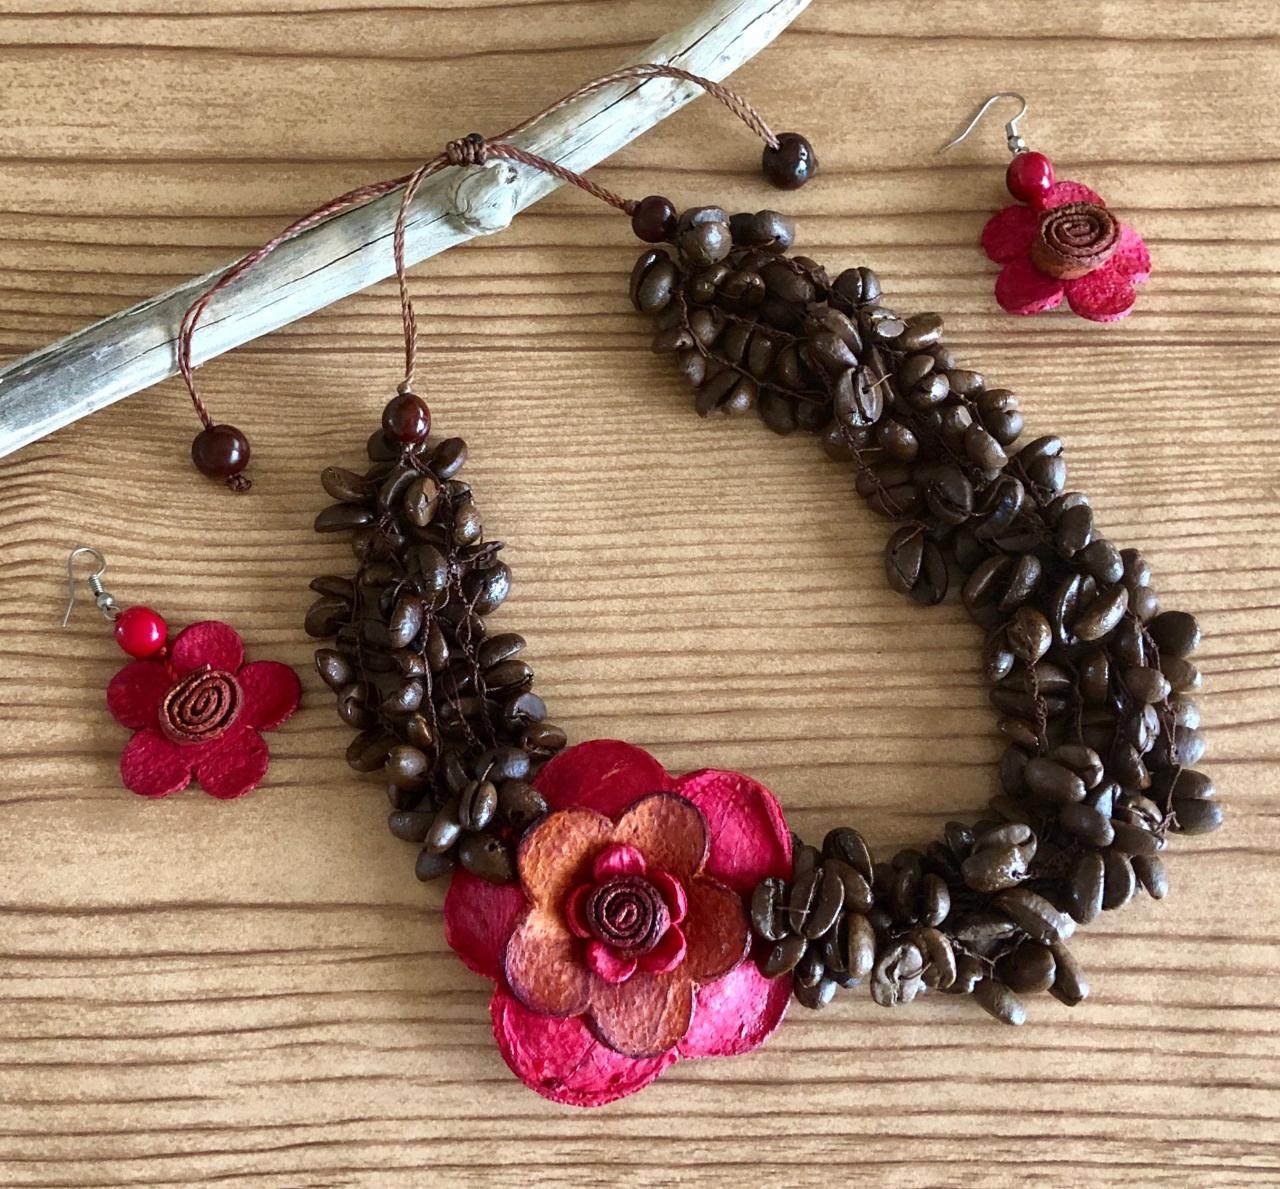 Red Necklace And Earrings, Orange Peel Necklace, Coffee Beans Necklace, Statement Necklaces, Strand Necklace, Layer Necklace, Flower